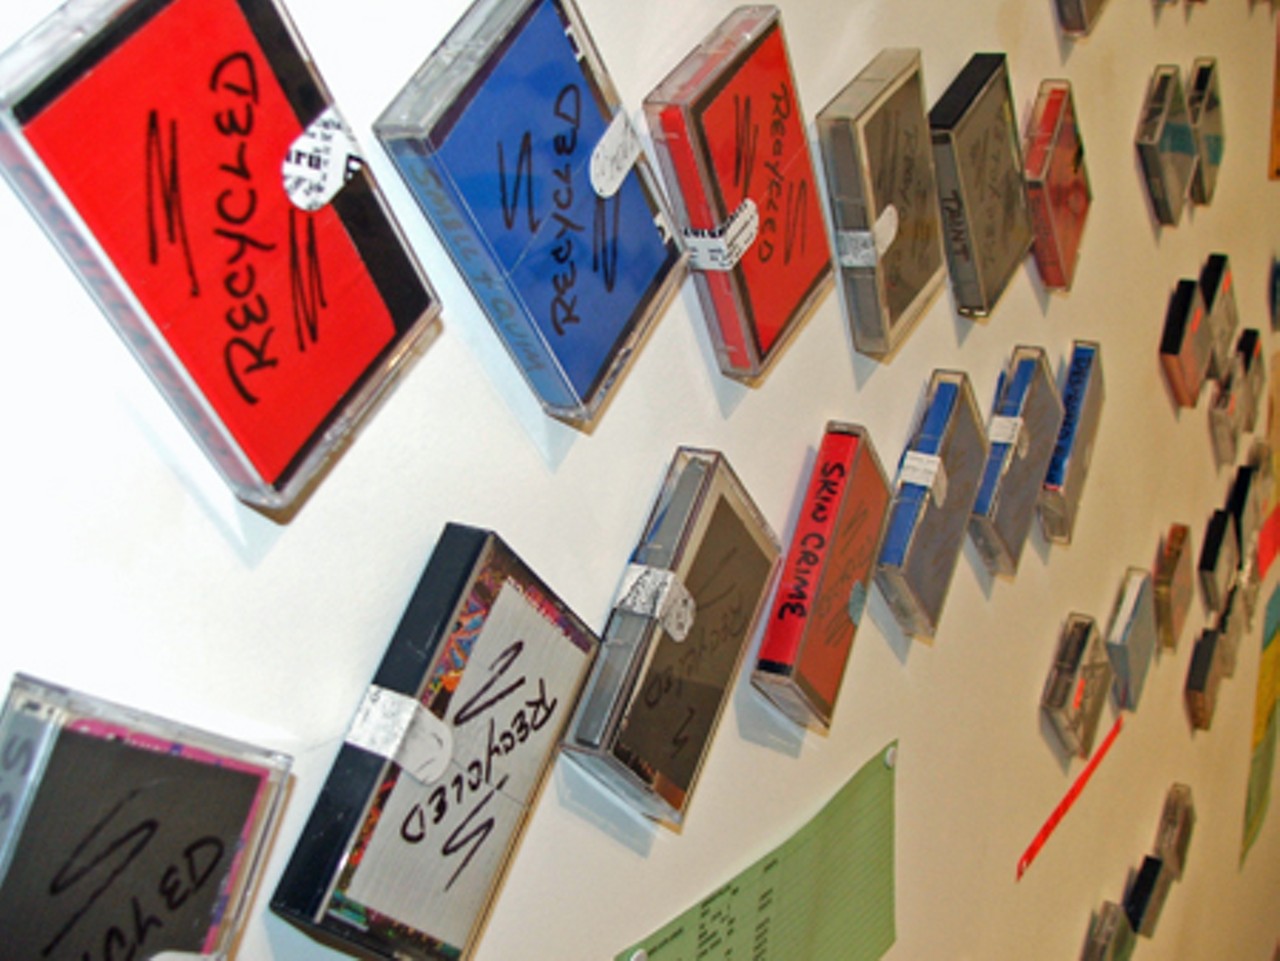 More than 100 cassette tapes will stay Velcroed to the walls of the Contemporary Art Museum through Sunday, April 20.